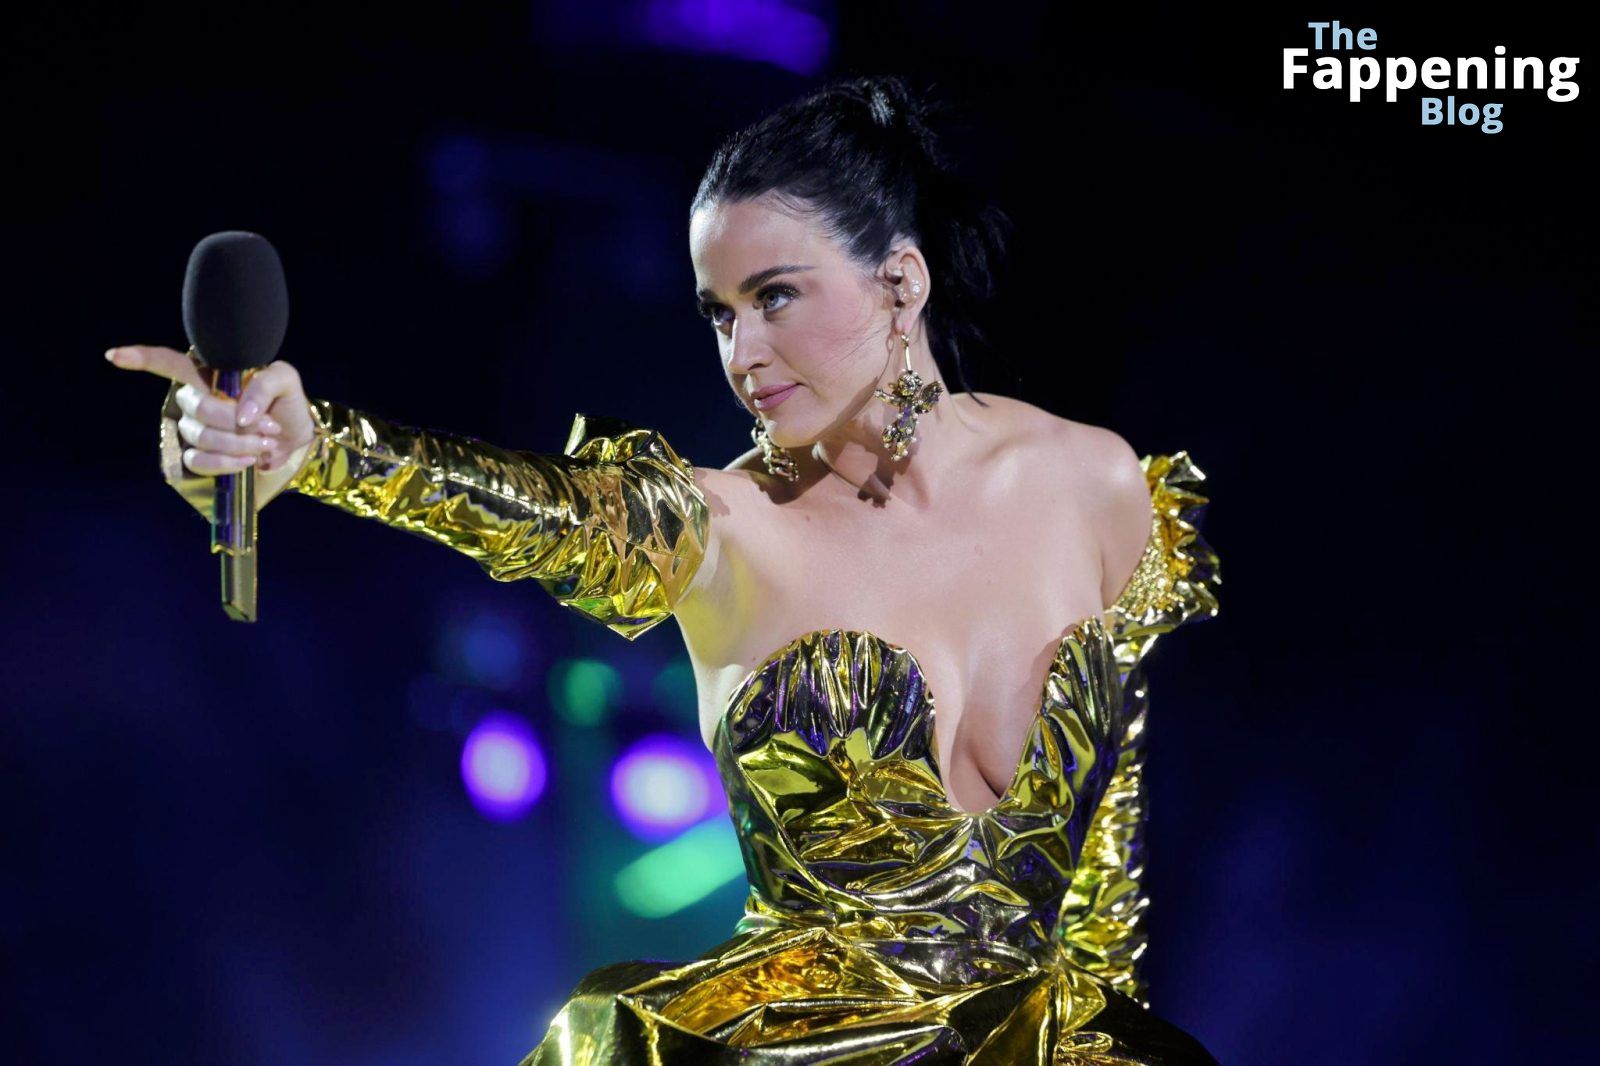 Katy Perry Displays Her Sexy Boobs at the Star-Studded Coronation Concert in Windsor (40 Photos + Video)